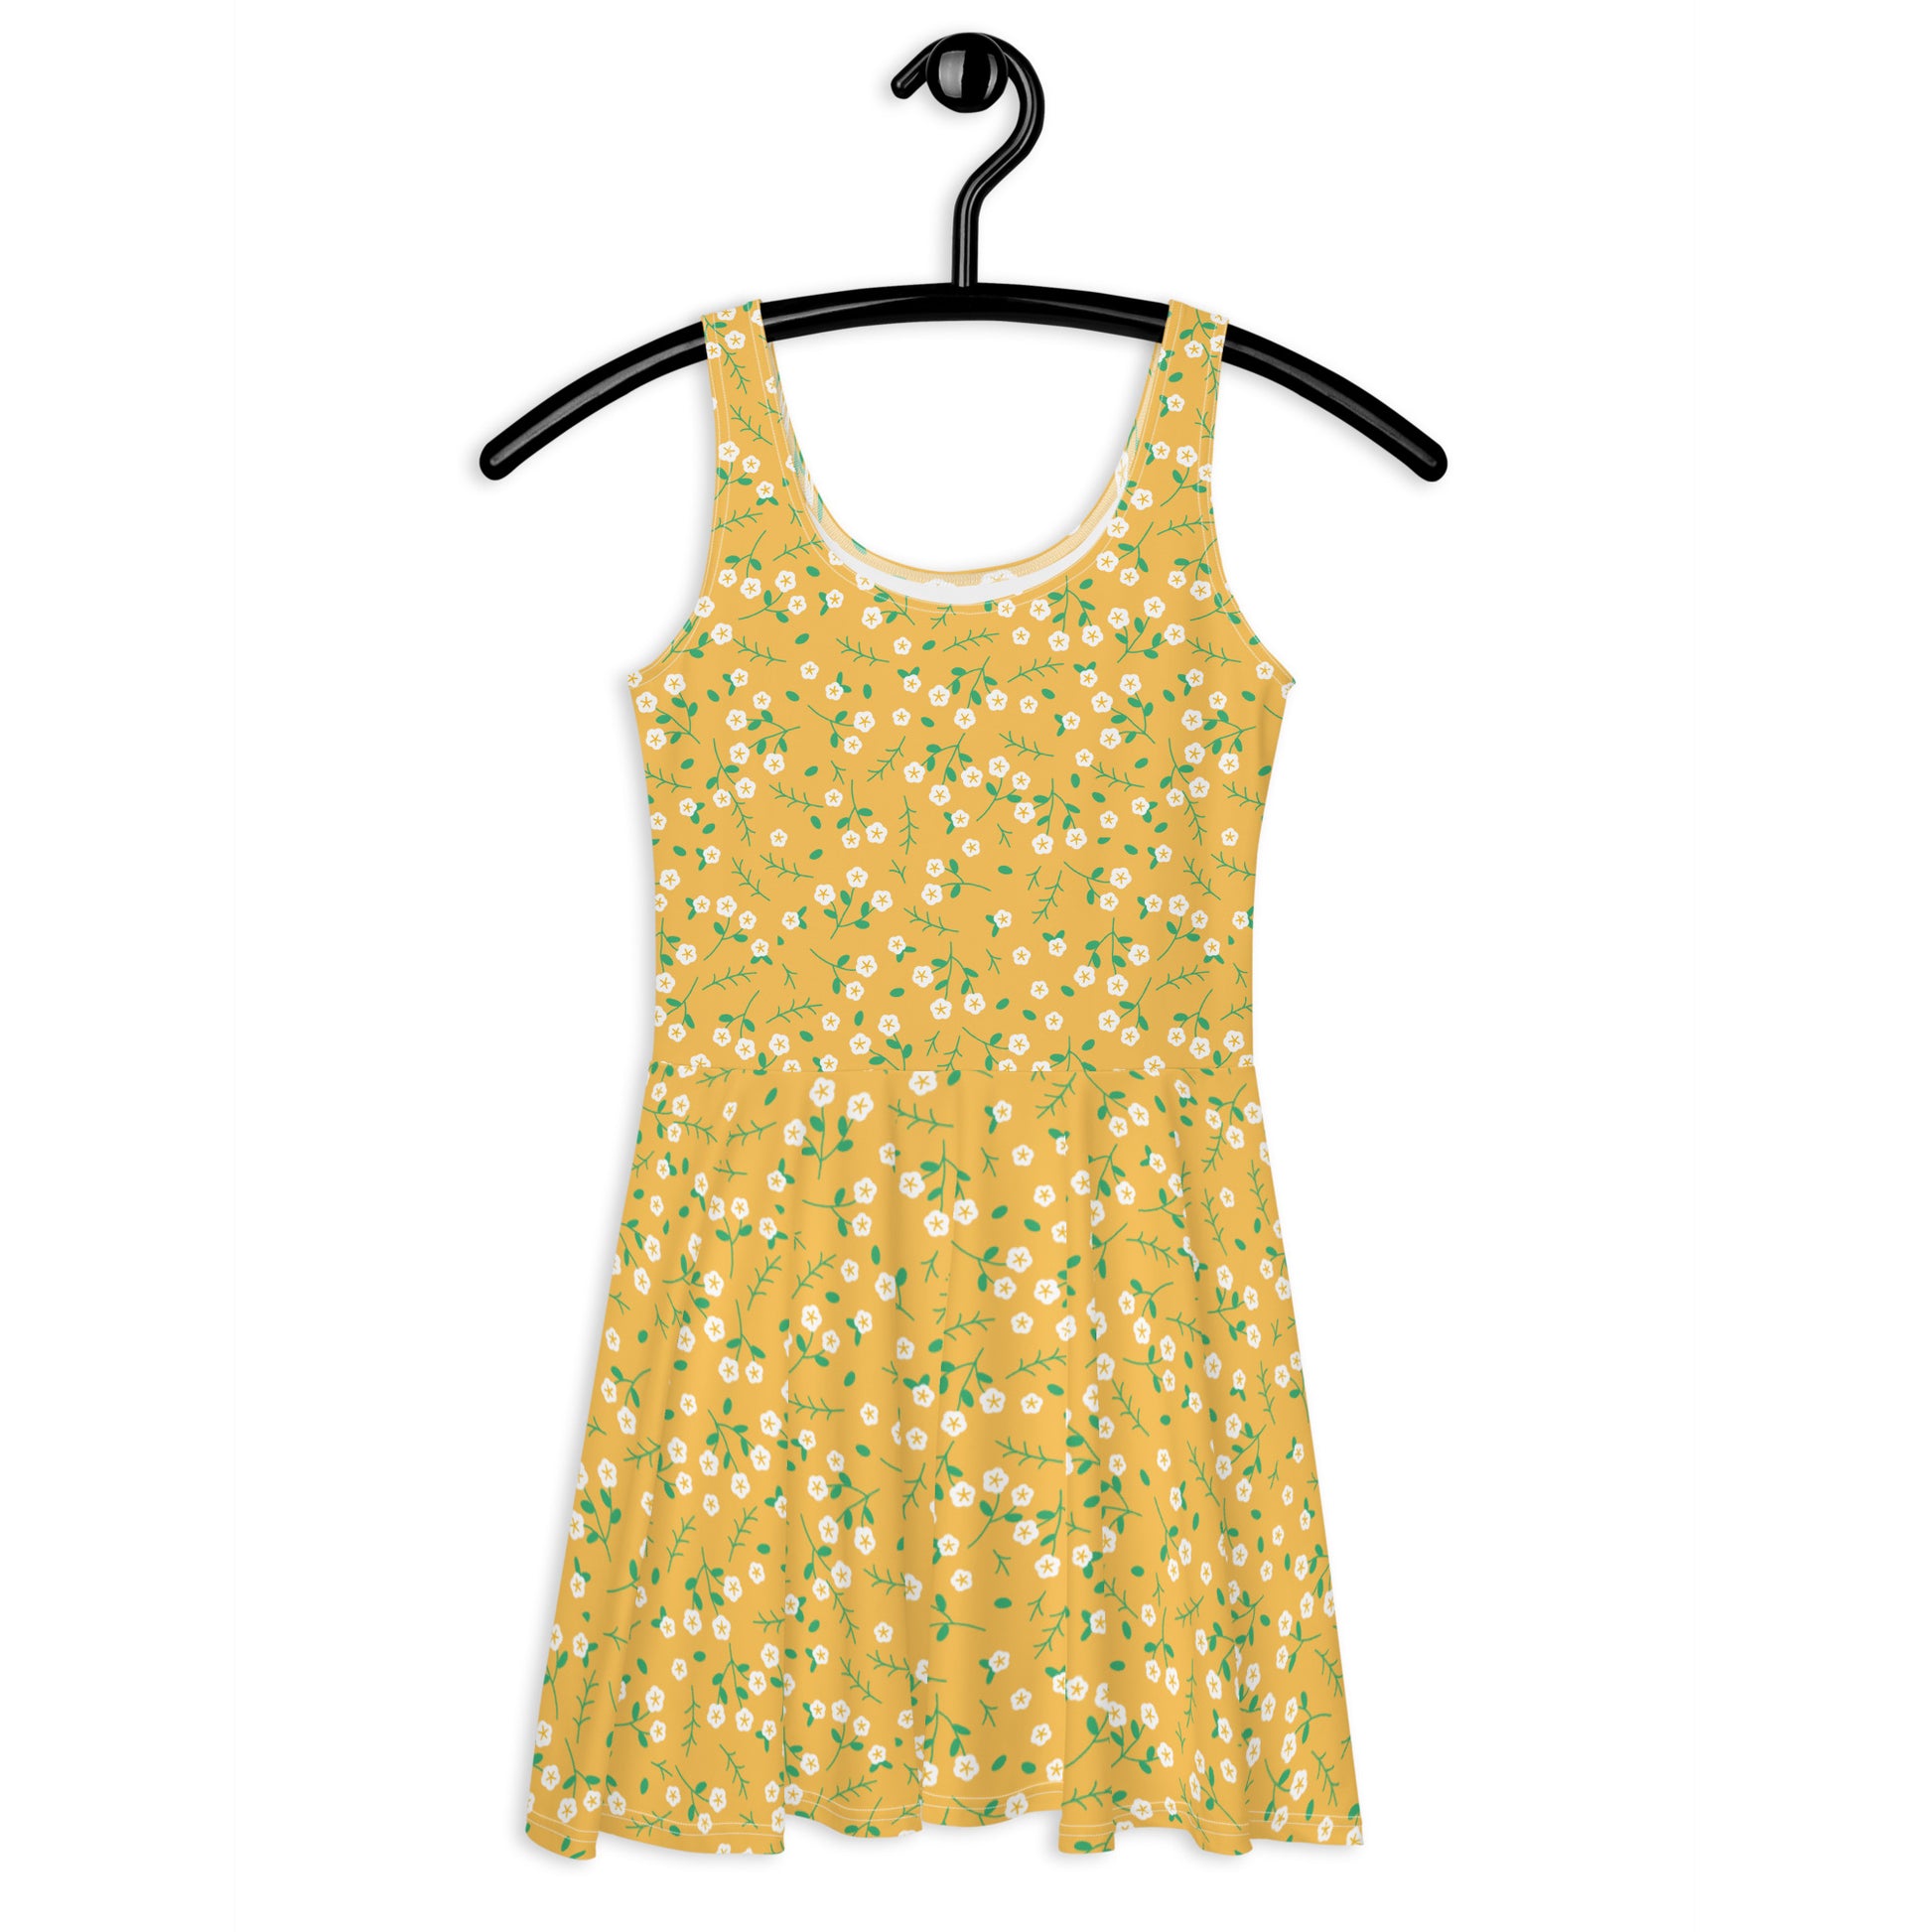 Yellow Floral Skater Dress Women, Daisy Flowers Print Summer Sleeveless Mini Short Cute Handmade Cocktail Party Sexy Casual Starcove Fashion